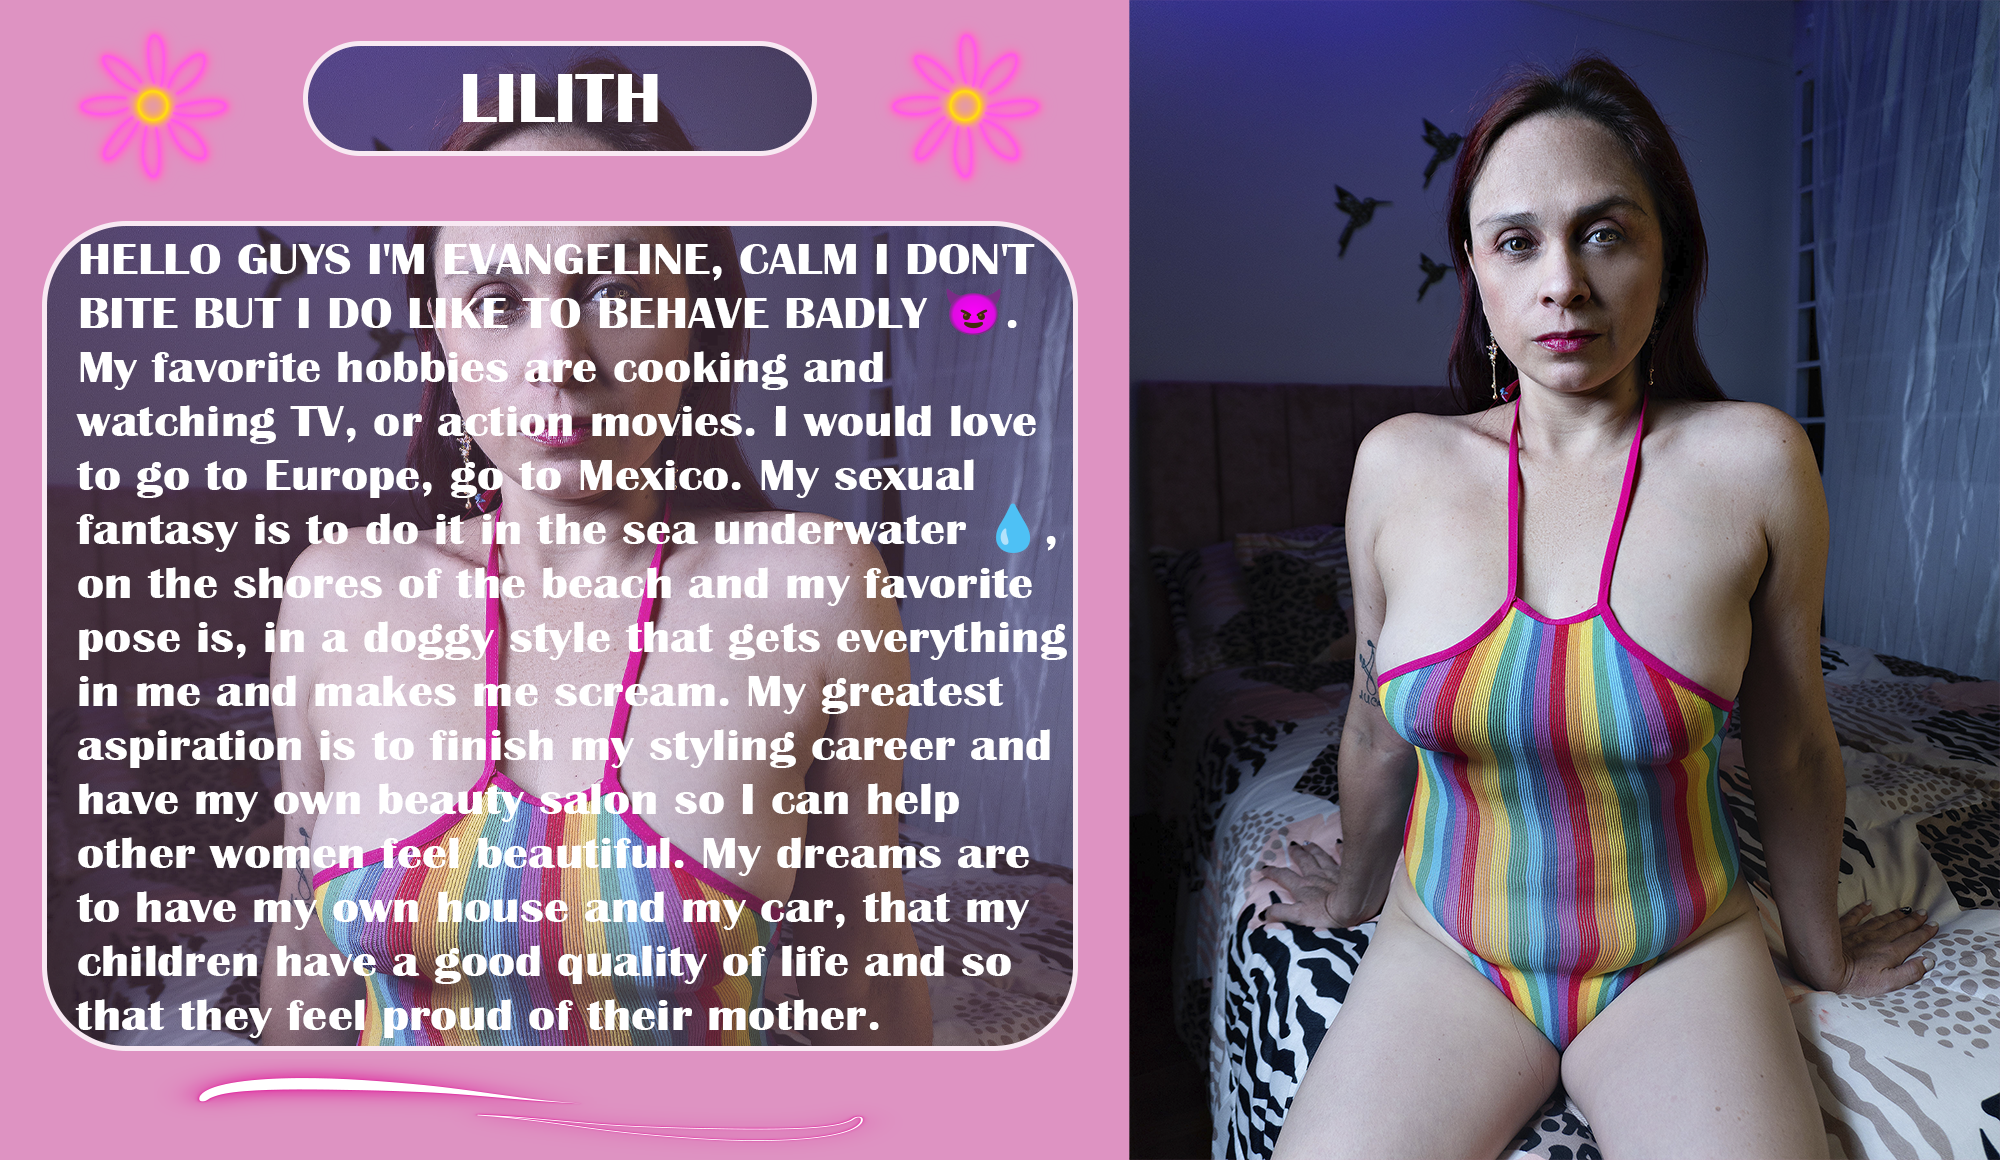 Lilith-collins I am Lilith image: 1